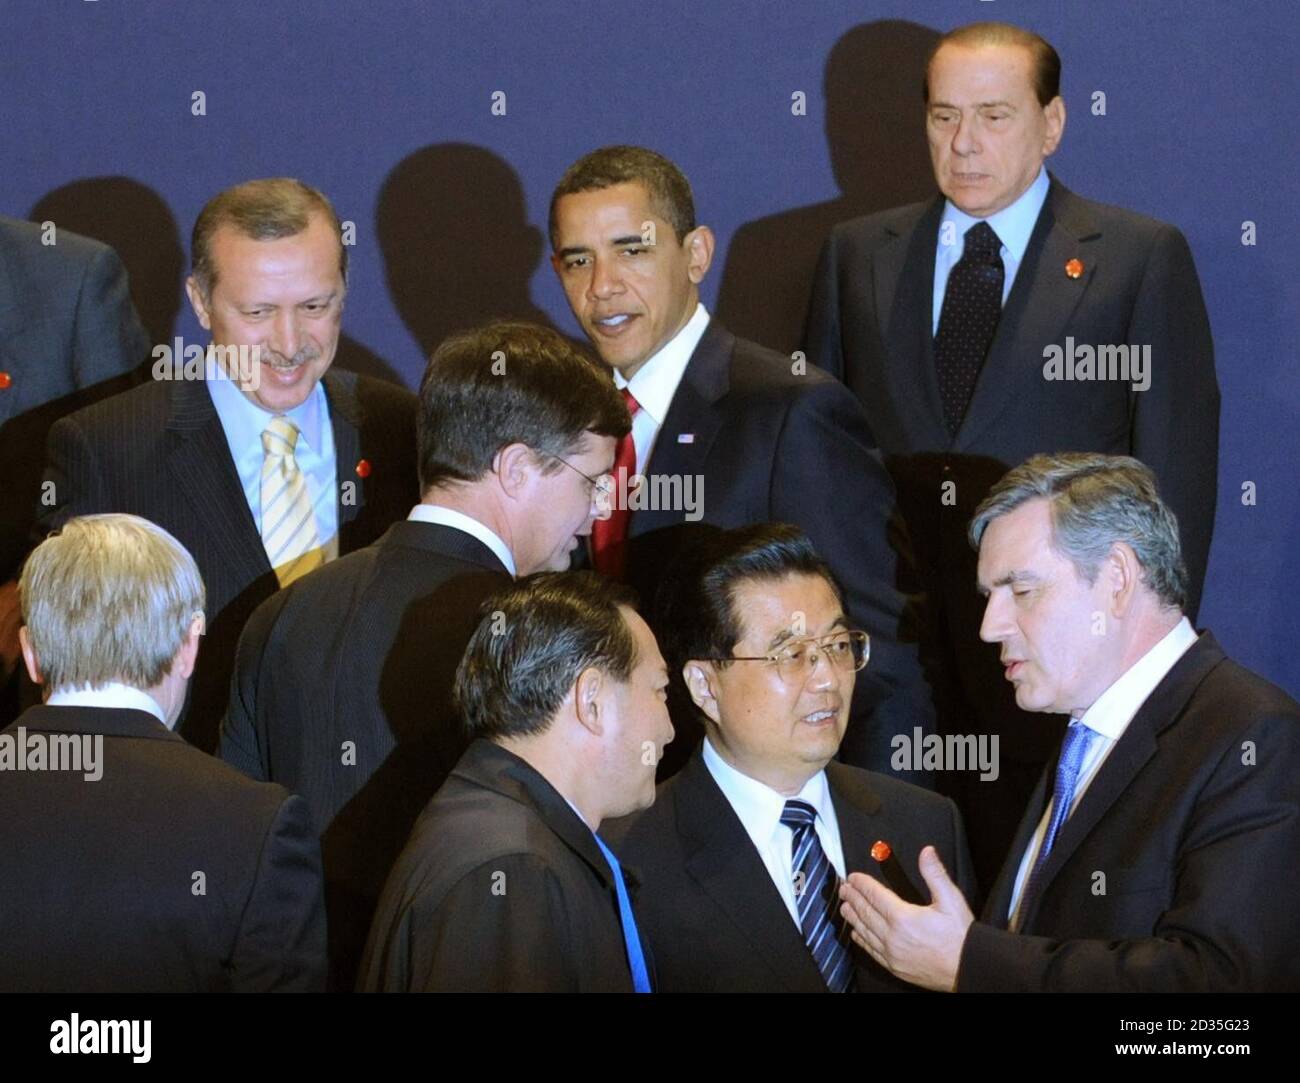 Prime Minister Gordon Brown speaks with Chinese President Hu Jintao as they pose for a group photograph at the start of the G20 Summit in London today. Stock Photo